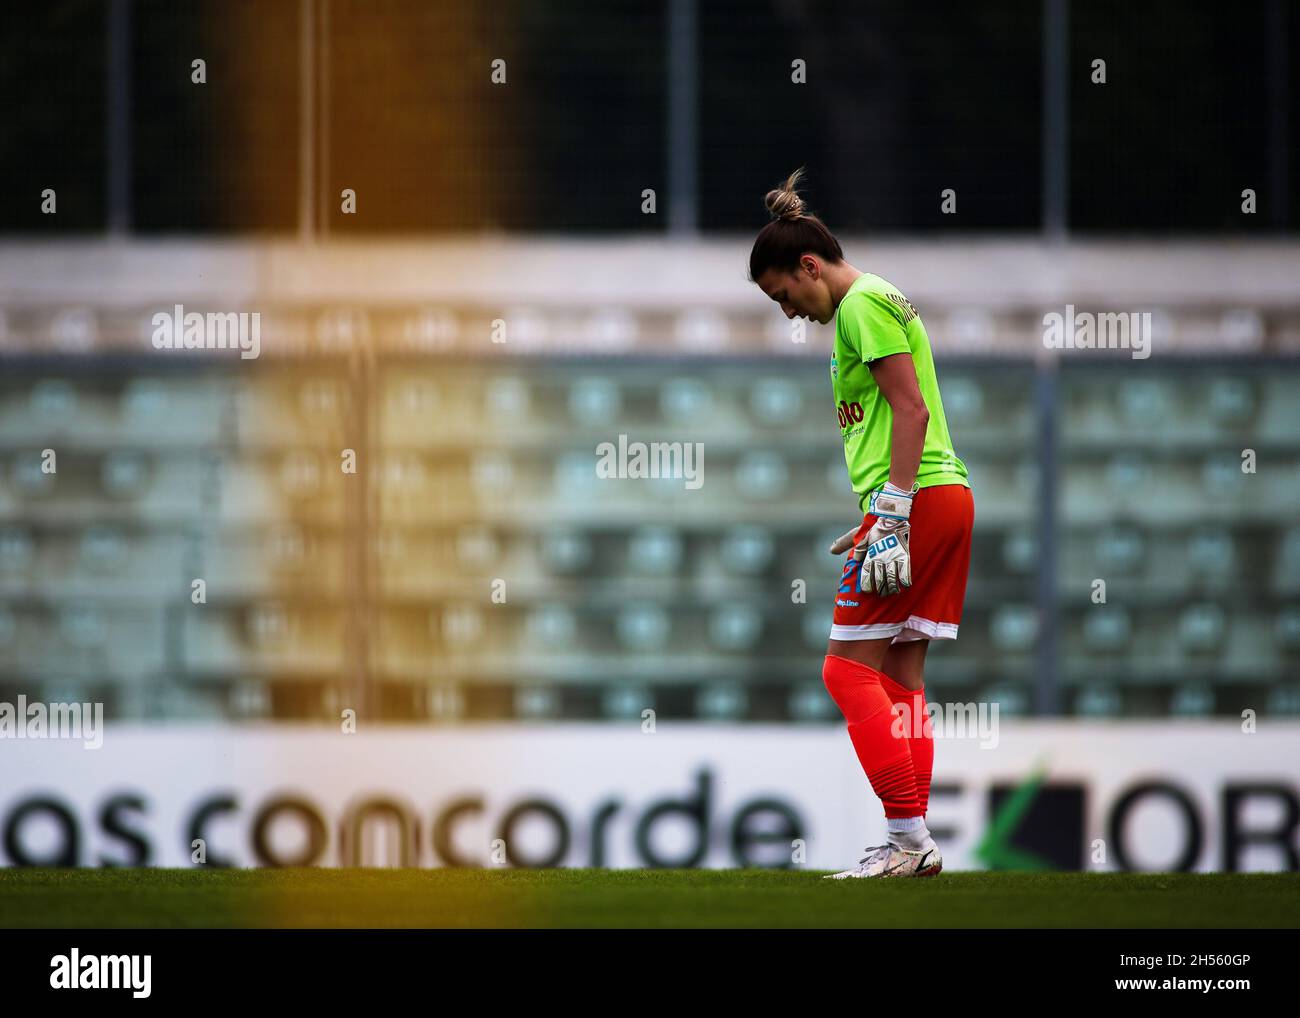 Firenze,Italy,October 31 2021 Cetinja Sara (21 Pomigliano CF) in action during the Serie A Femminile game between ACF Fiorentina and AC Milan at Stadio Comunale Gino Bozzi in Firenze, Italy  Michele Finessi/SPP Stock Photo